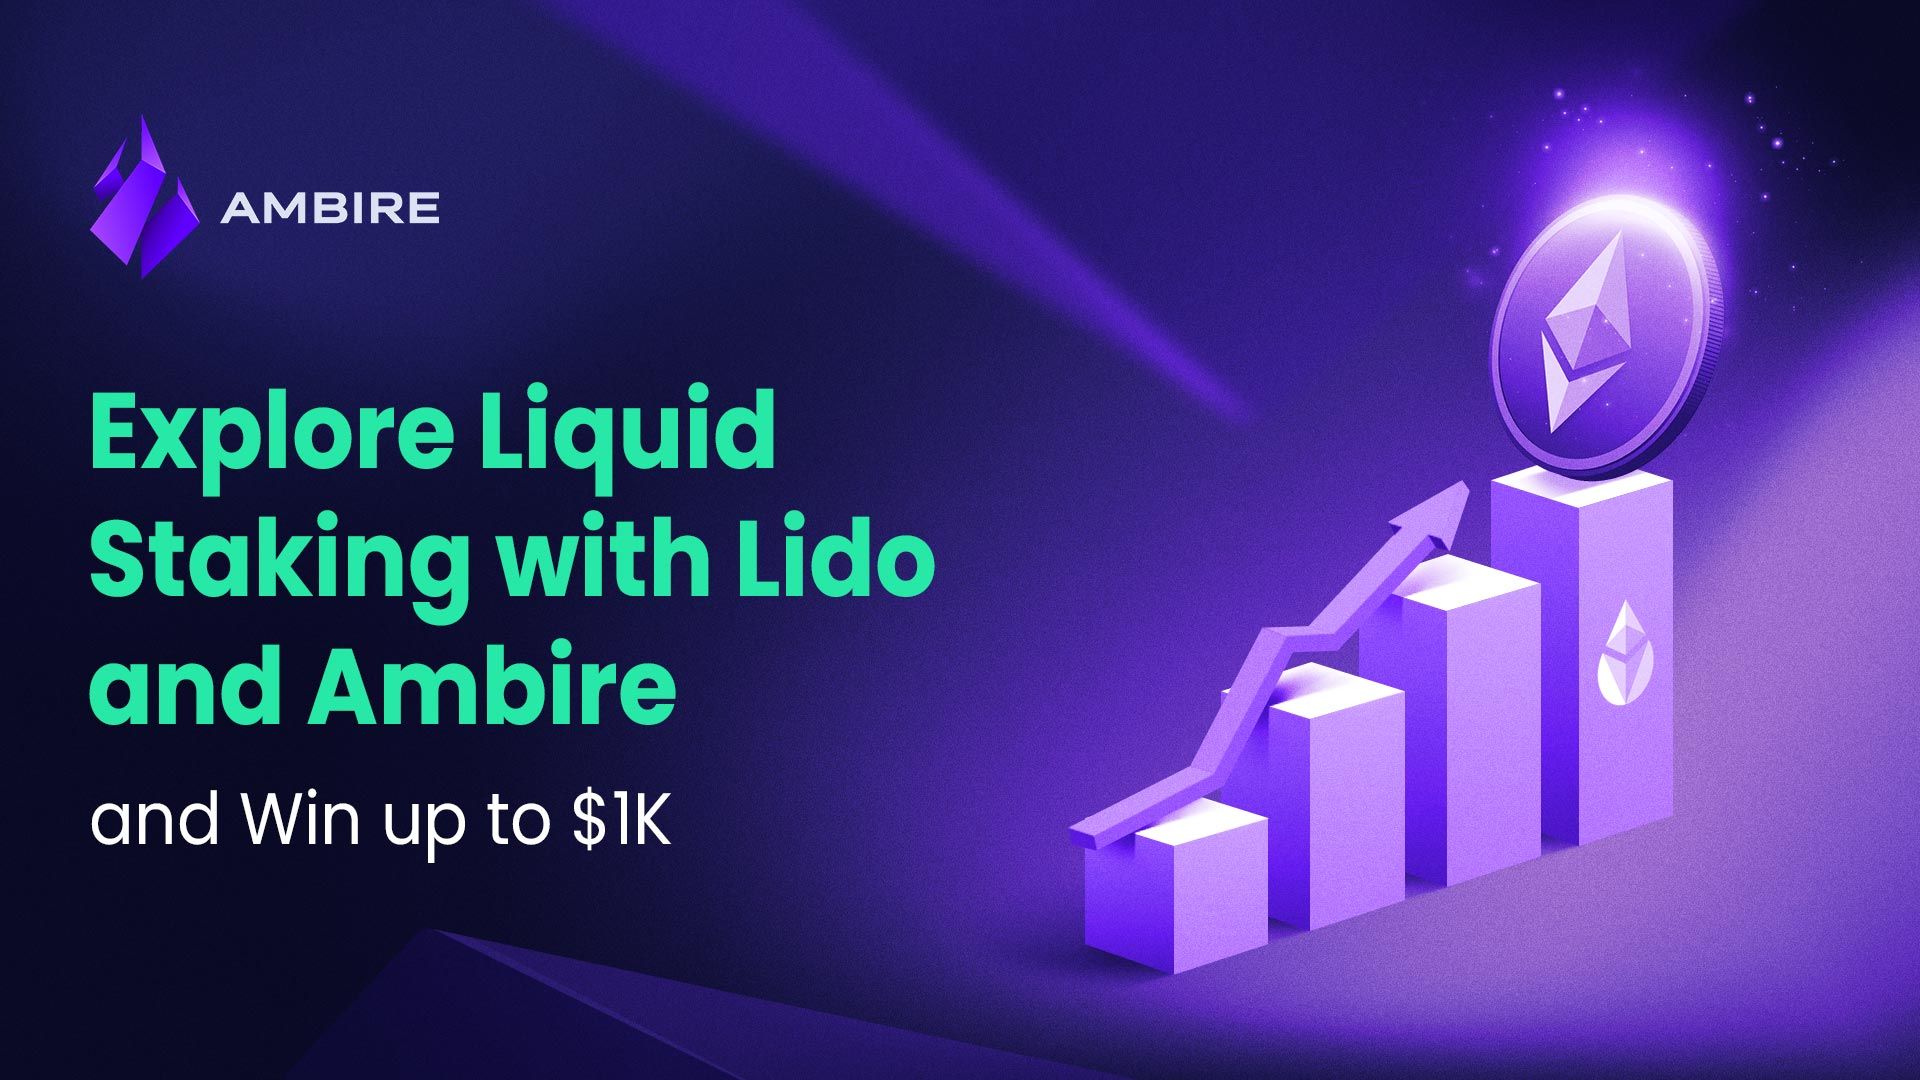 Explore Liquid Staking with Lido and Ambire and Win up to $1K